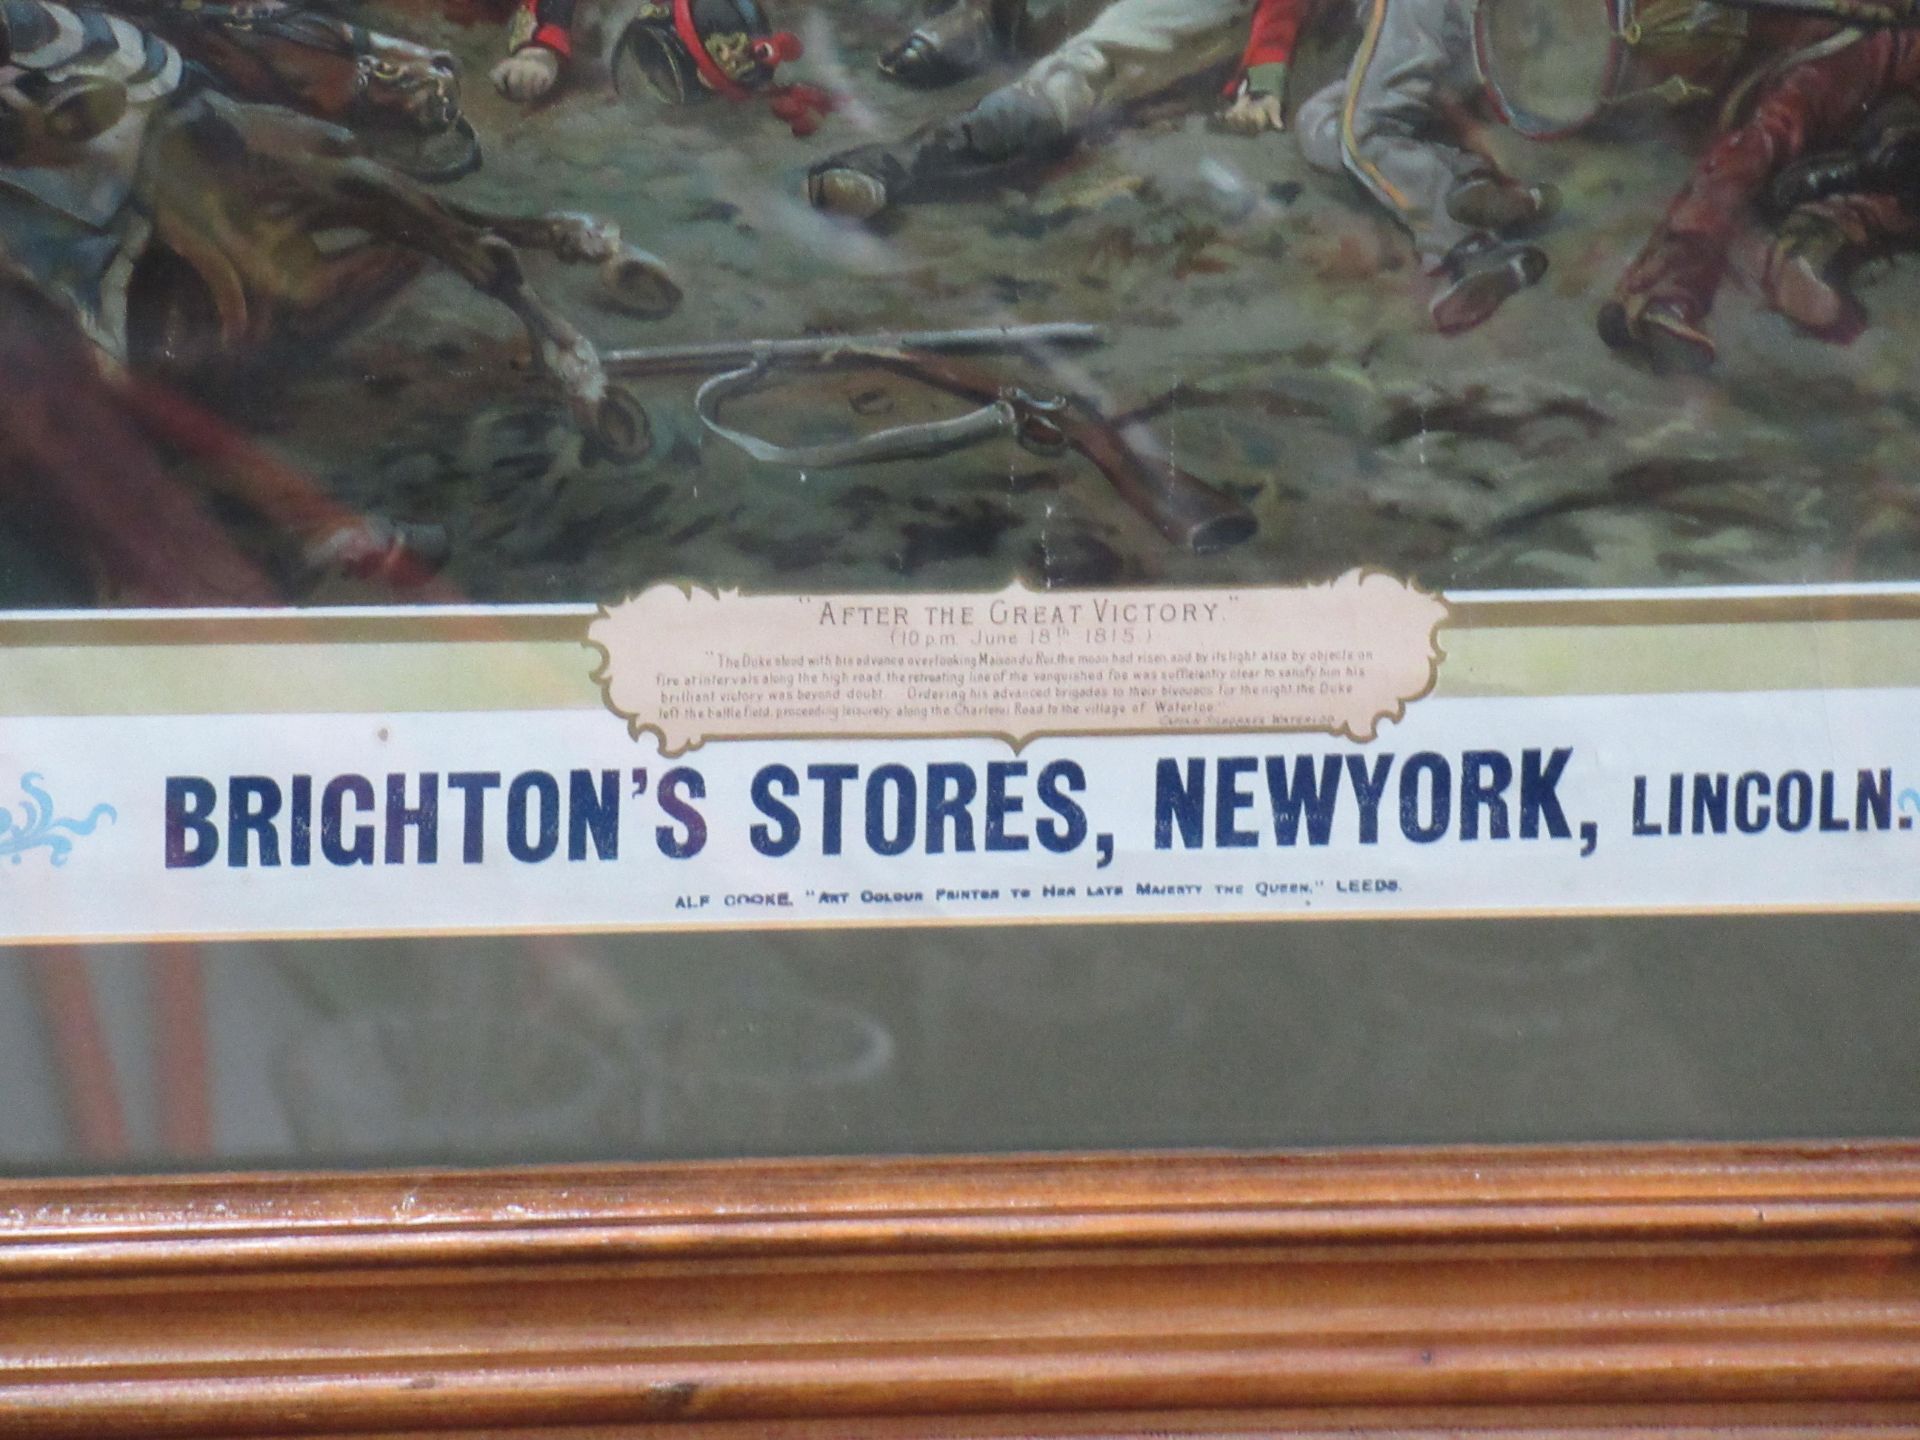 Brighton's Stores, New York, Lincoln 'After The Great Victory- 10pm June 18th 1815' 1903 calendar in - Bild 2 aus 5